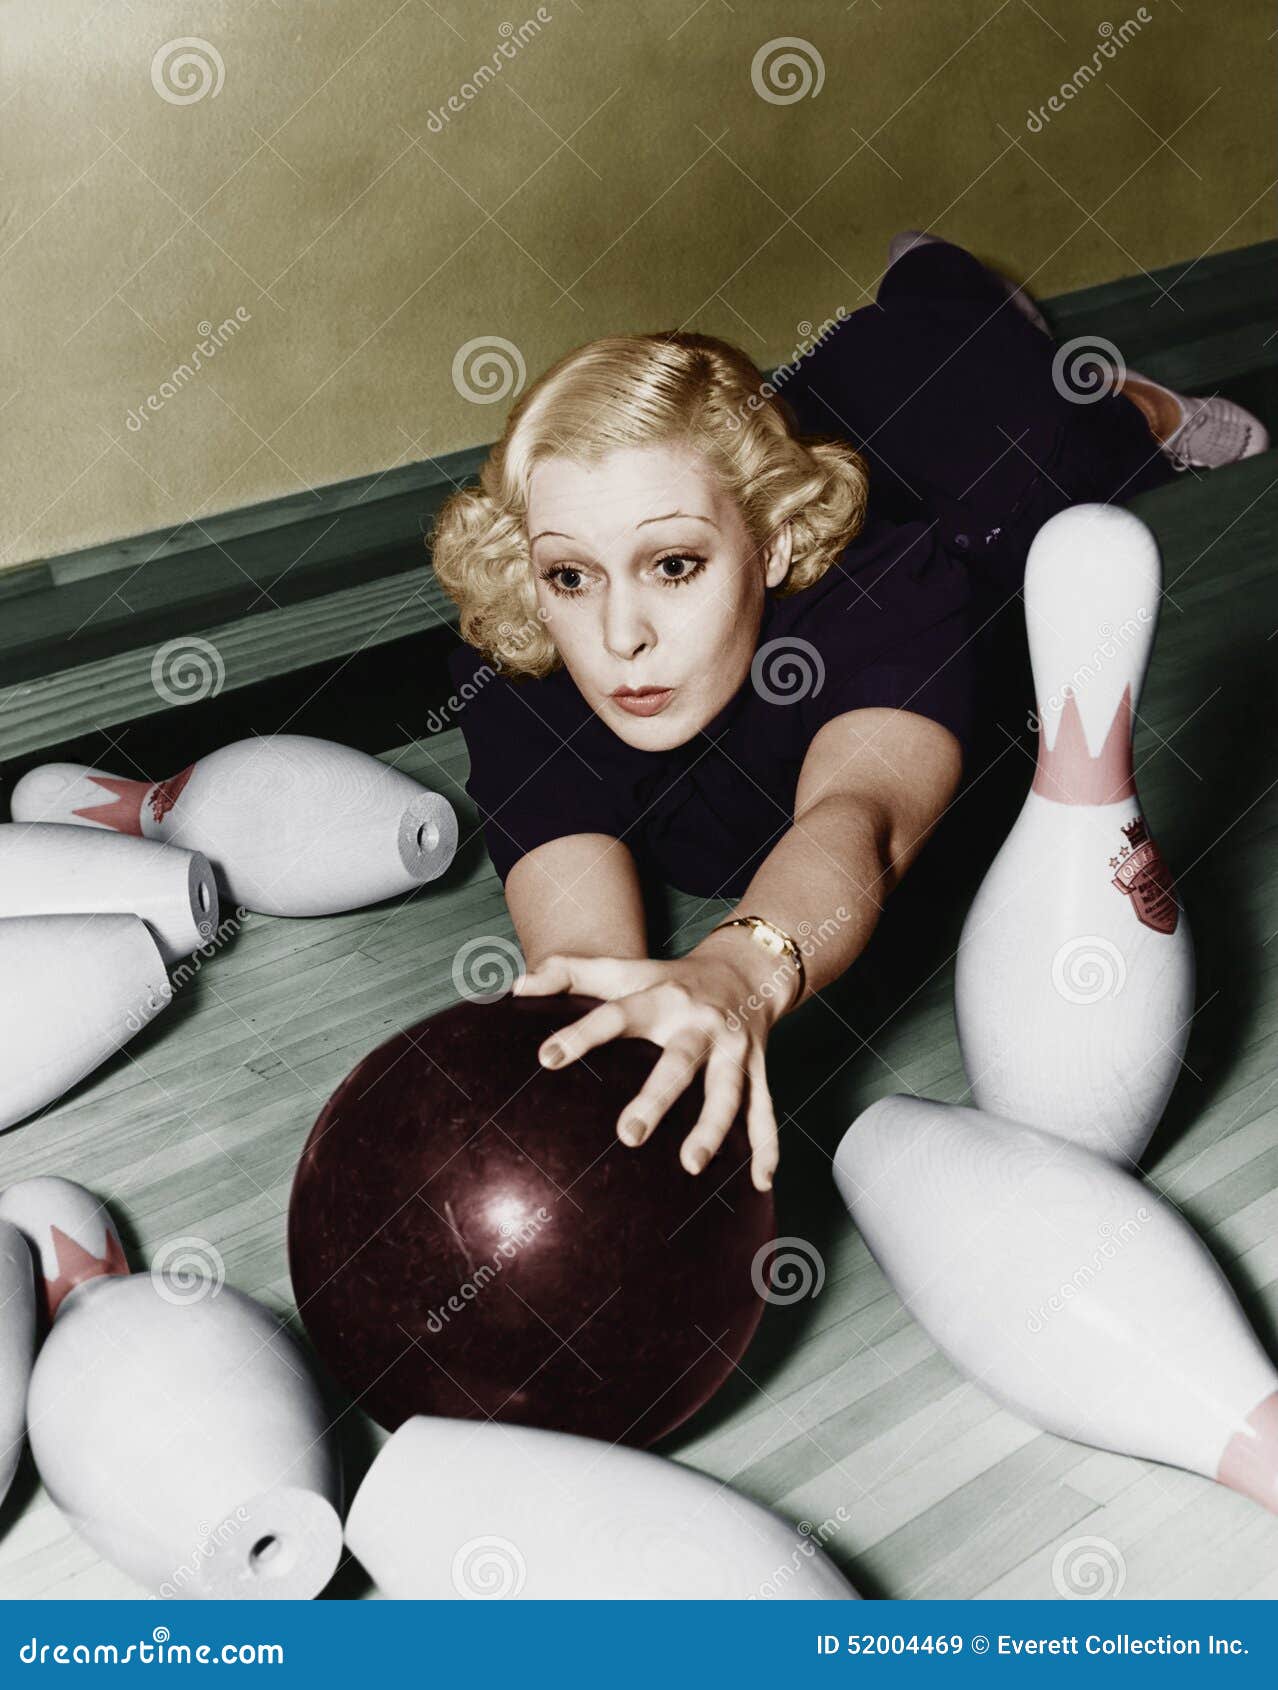 woman having bowling accident